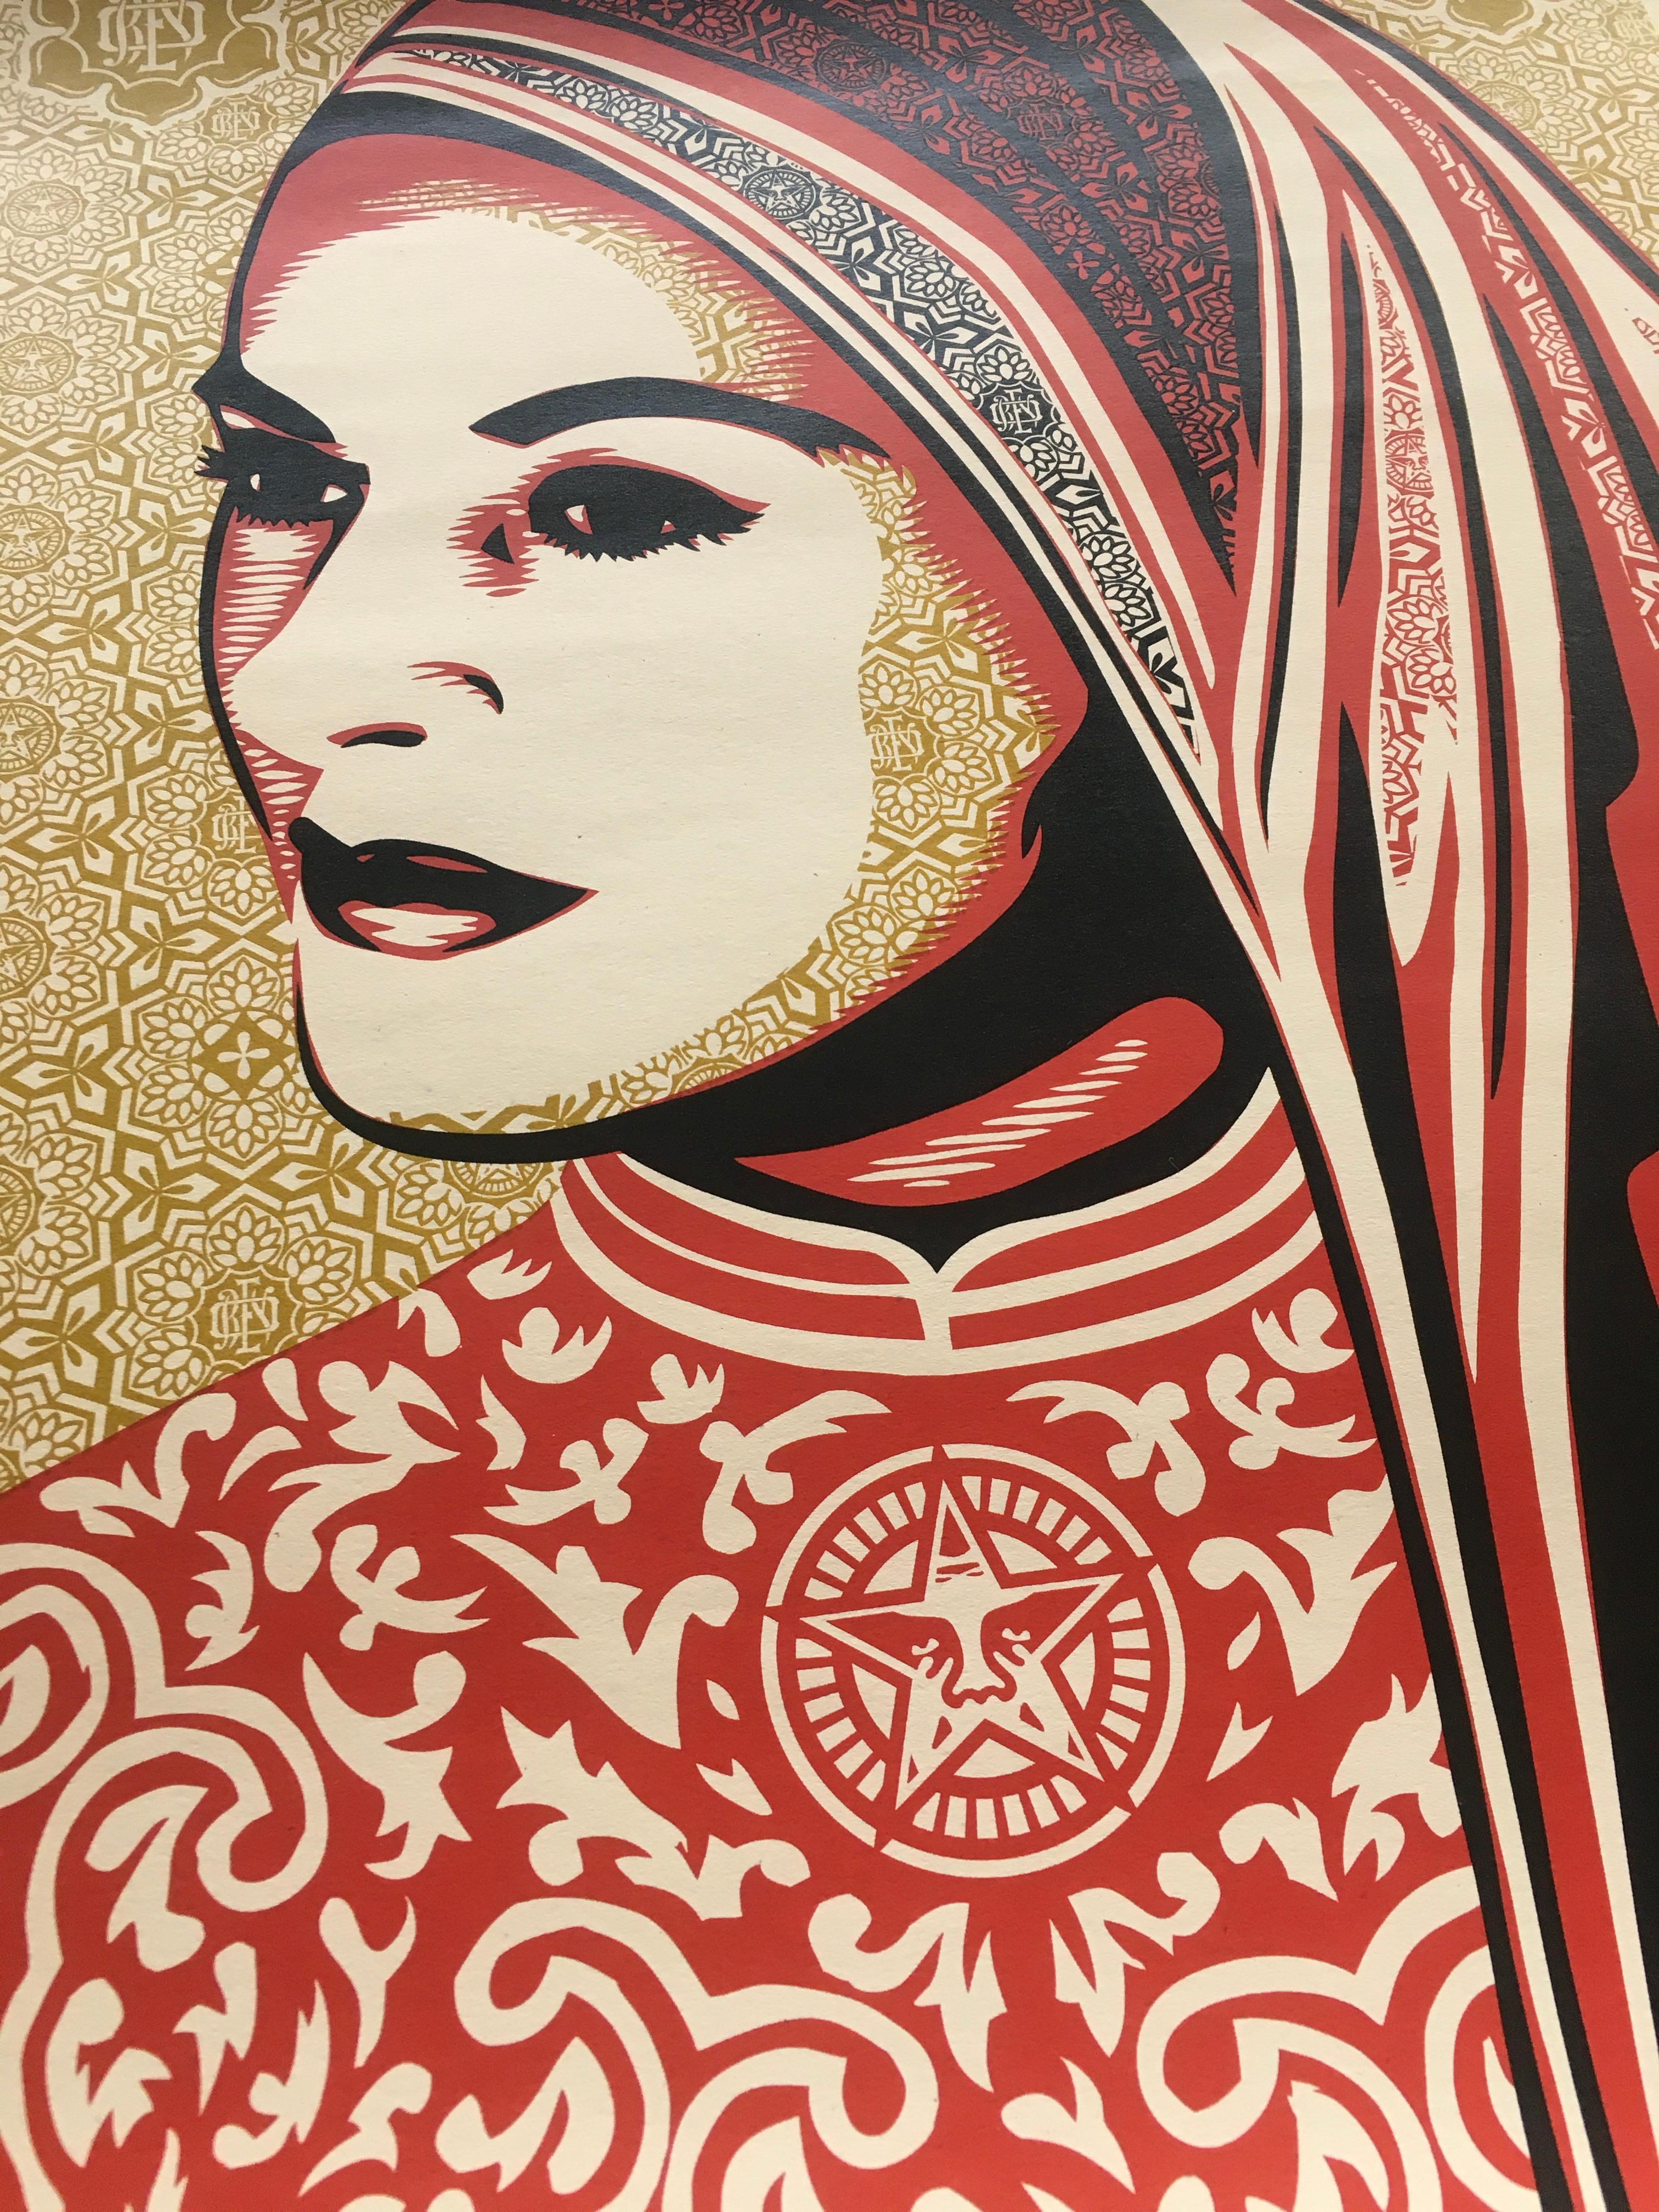 'Peace Woman Kennwood' by Shepard Fairey, 2008
18 x 24 inches (45,7 x 61 cm)
Screen print on cream, speckletone fine art paper.
Rare Kenwood Vineyard limited edition of 200 (137 /200)
Hand-signed and dated by Shepard Fairey. Signature, date and the